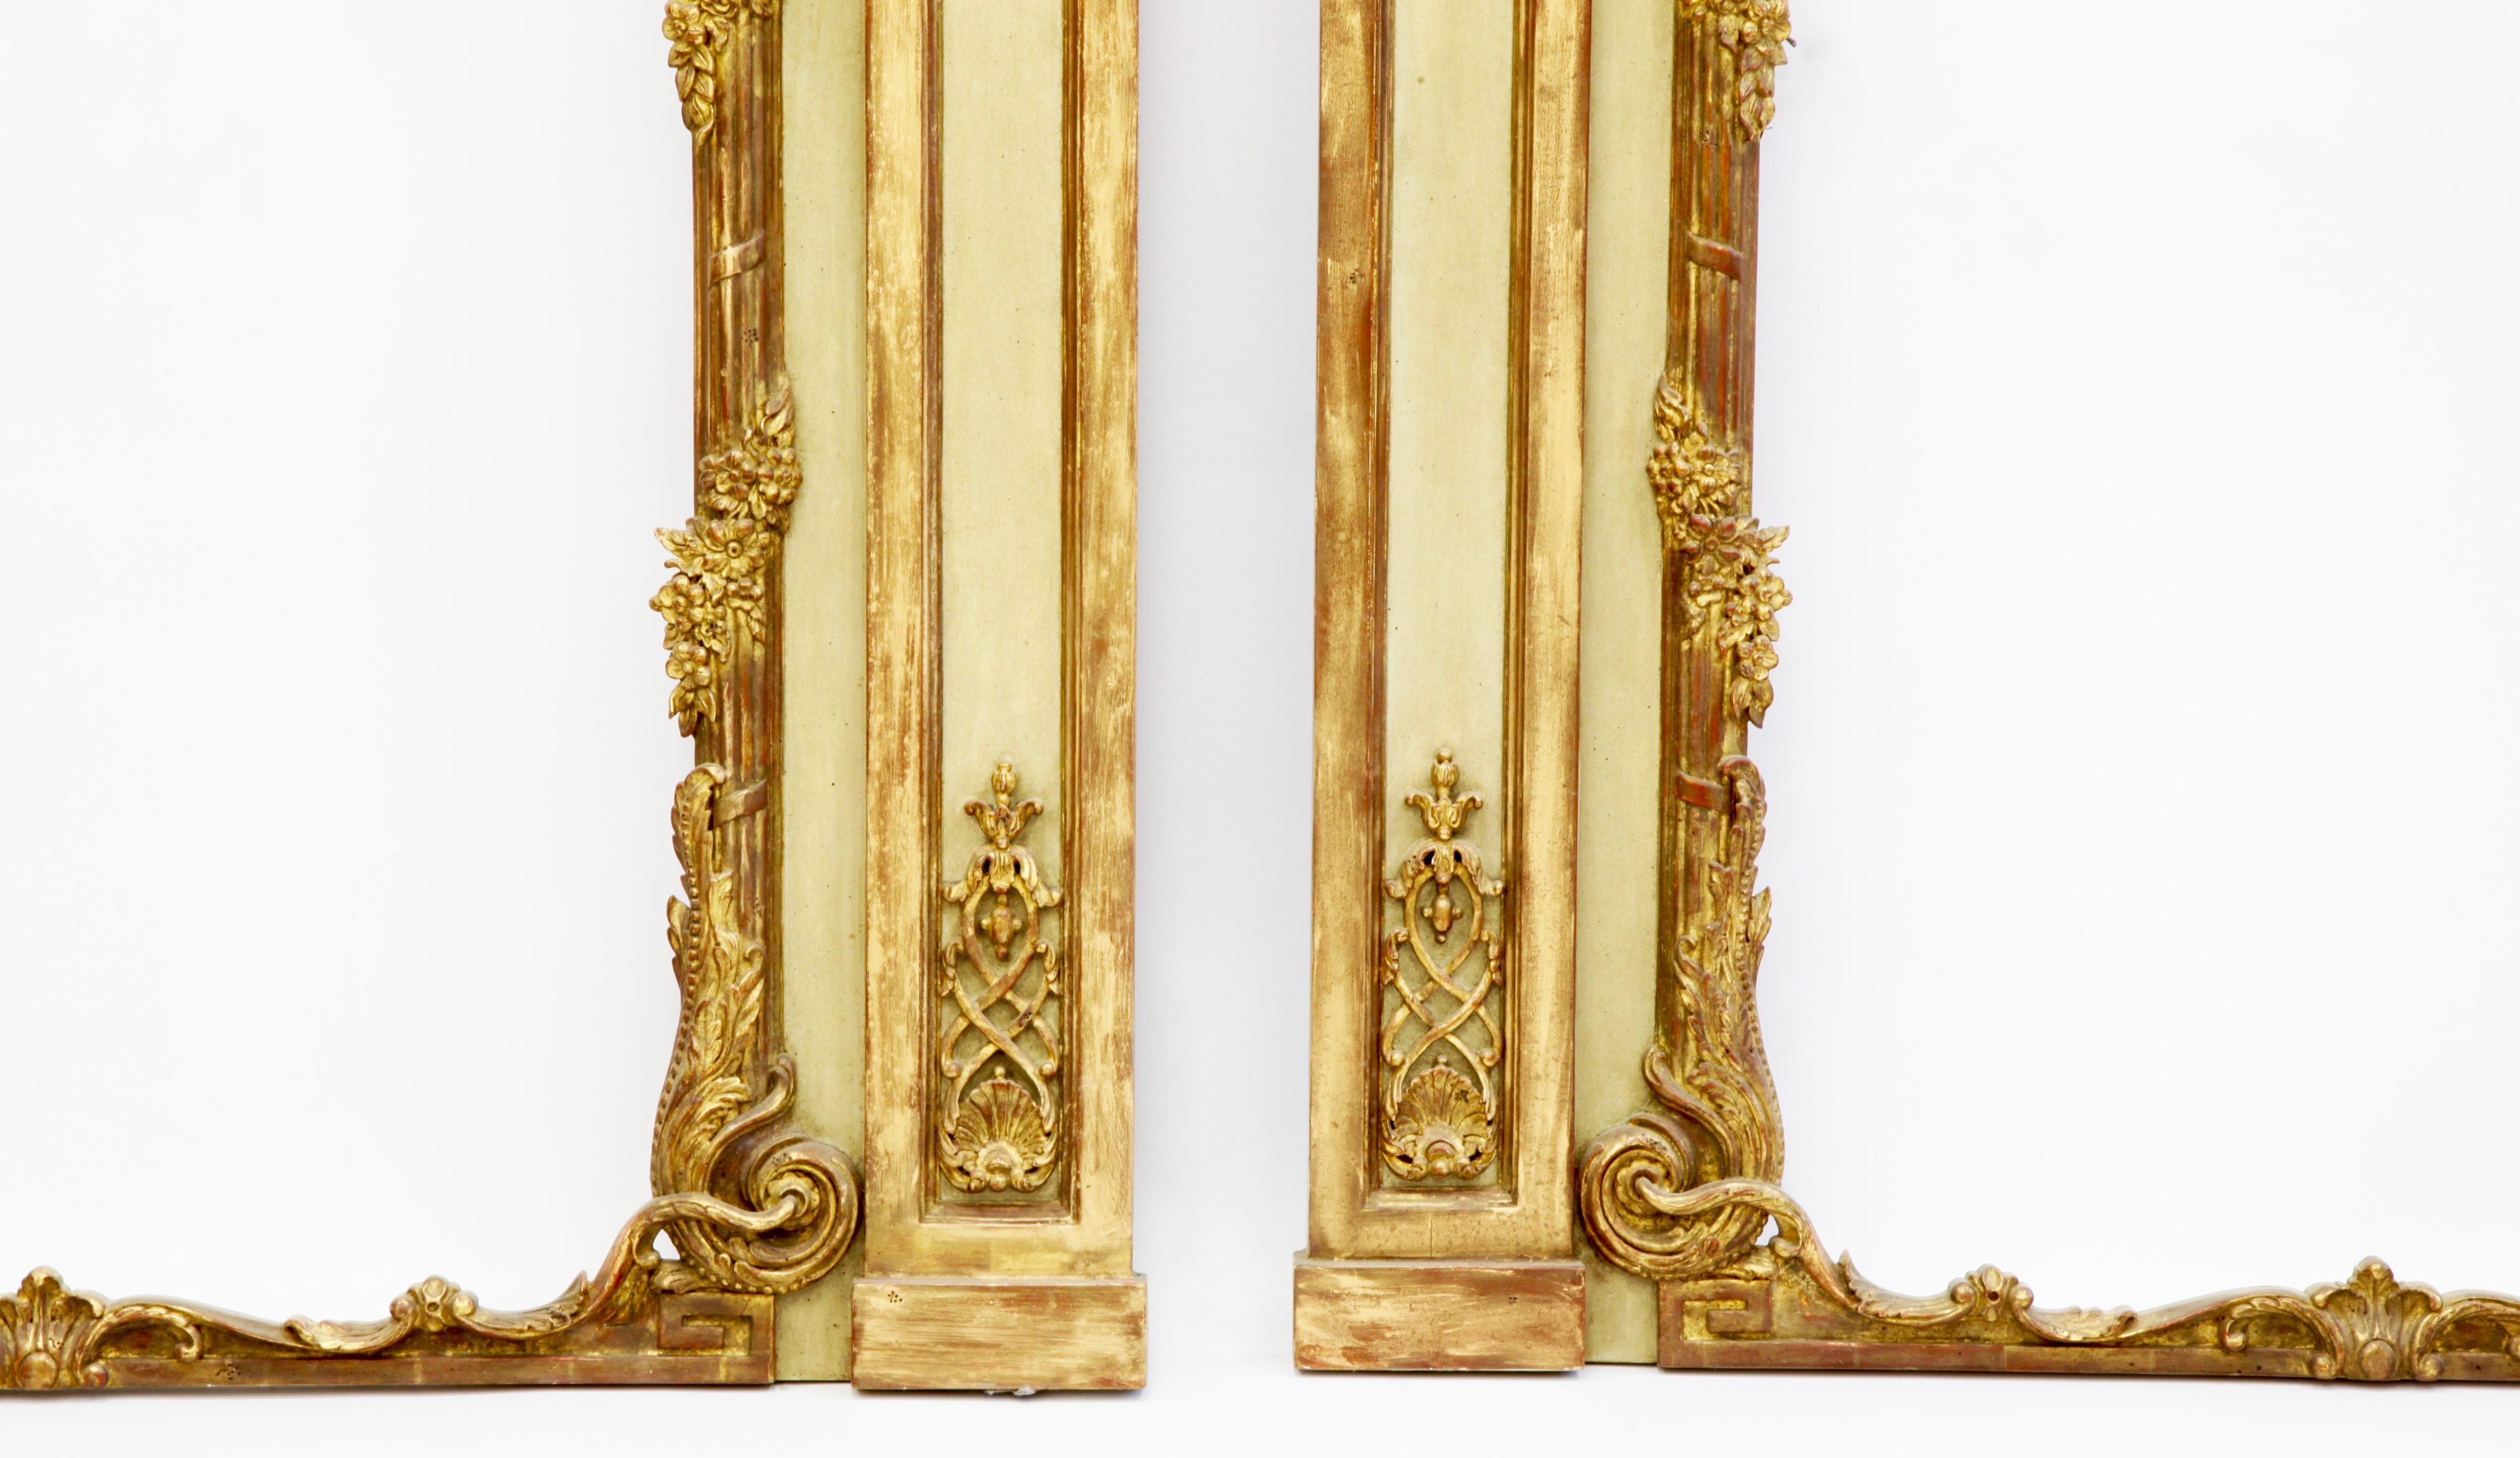 Louis XV style mirrors, hand carved by La Maison London.
Finished in a French green with gilded highlights.
Made as a pair or can be sold separately.